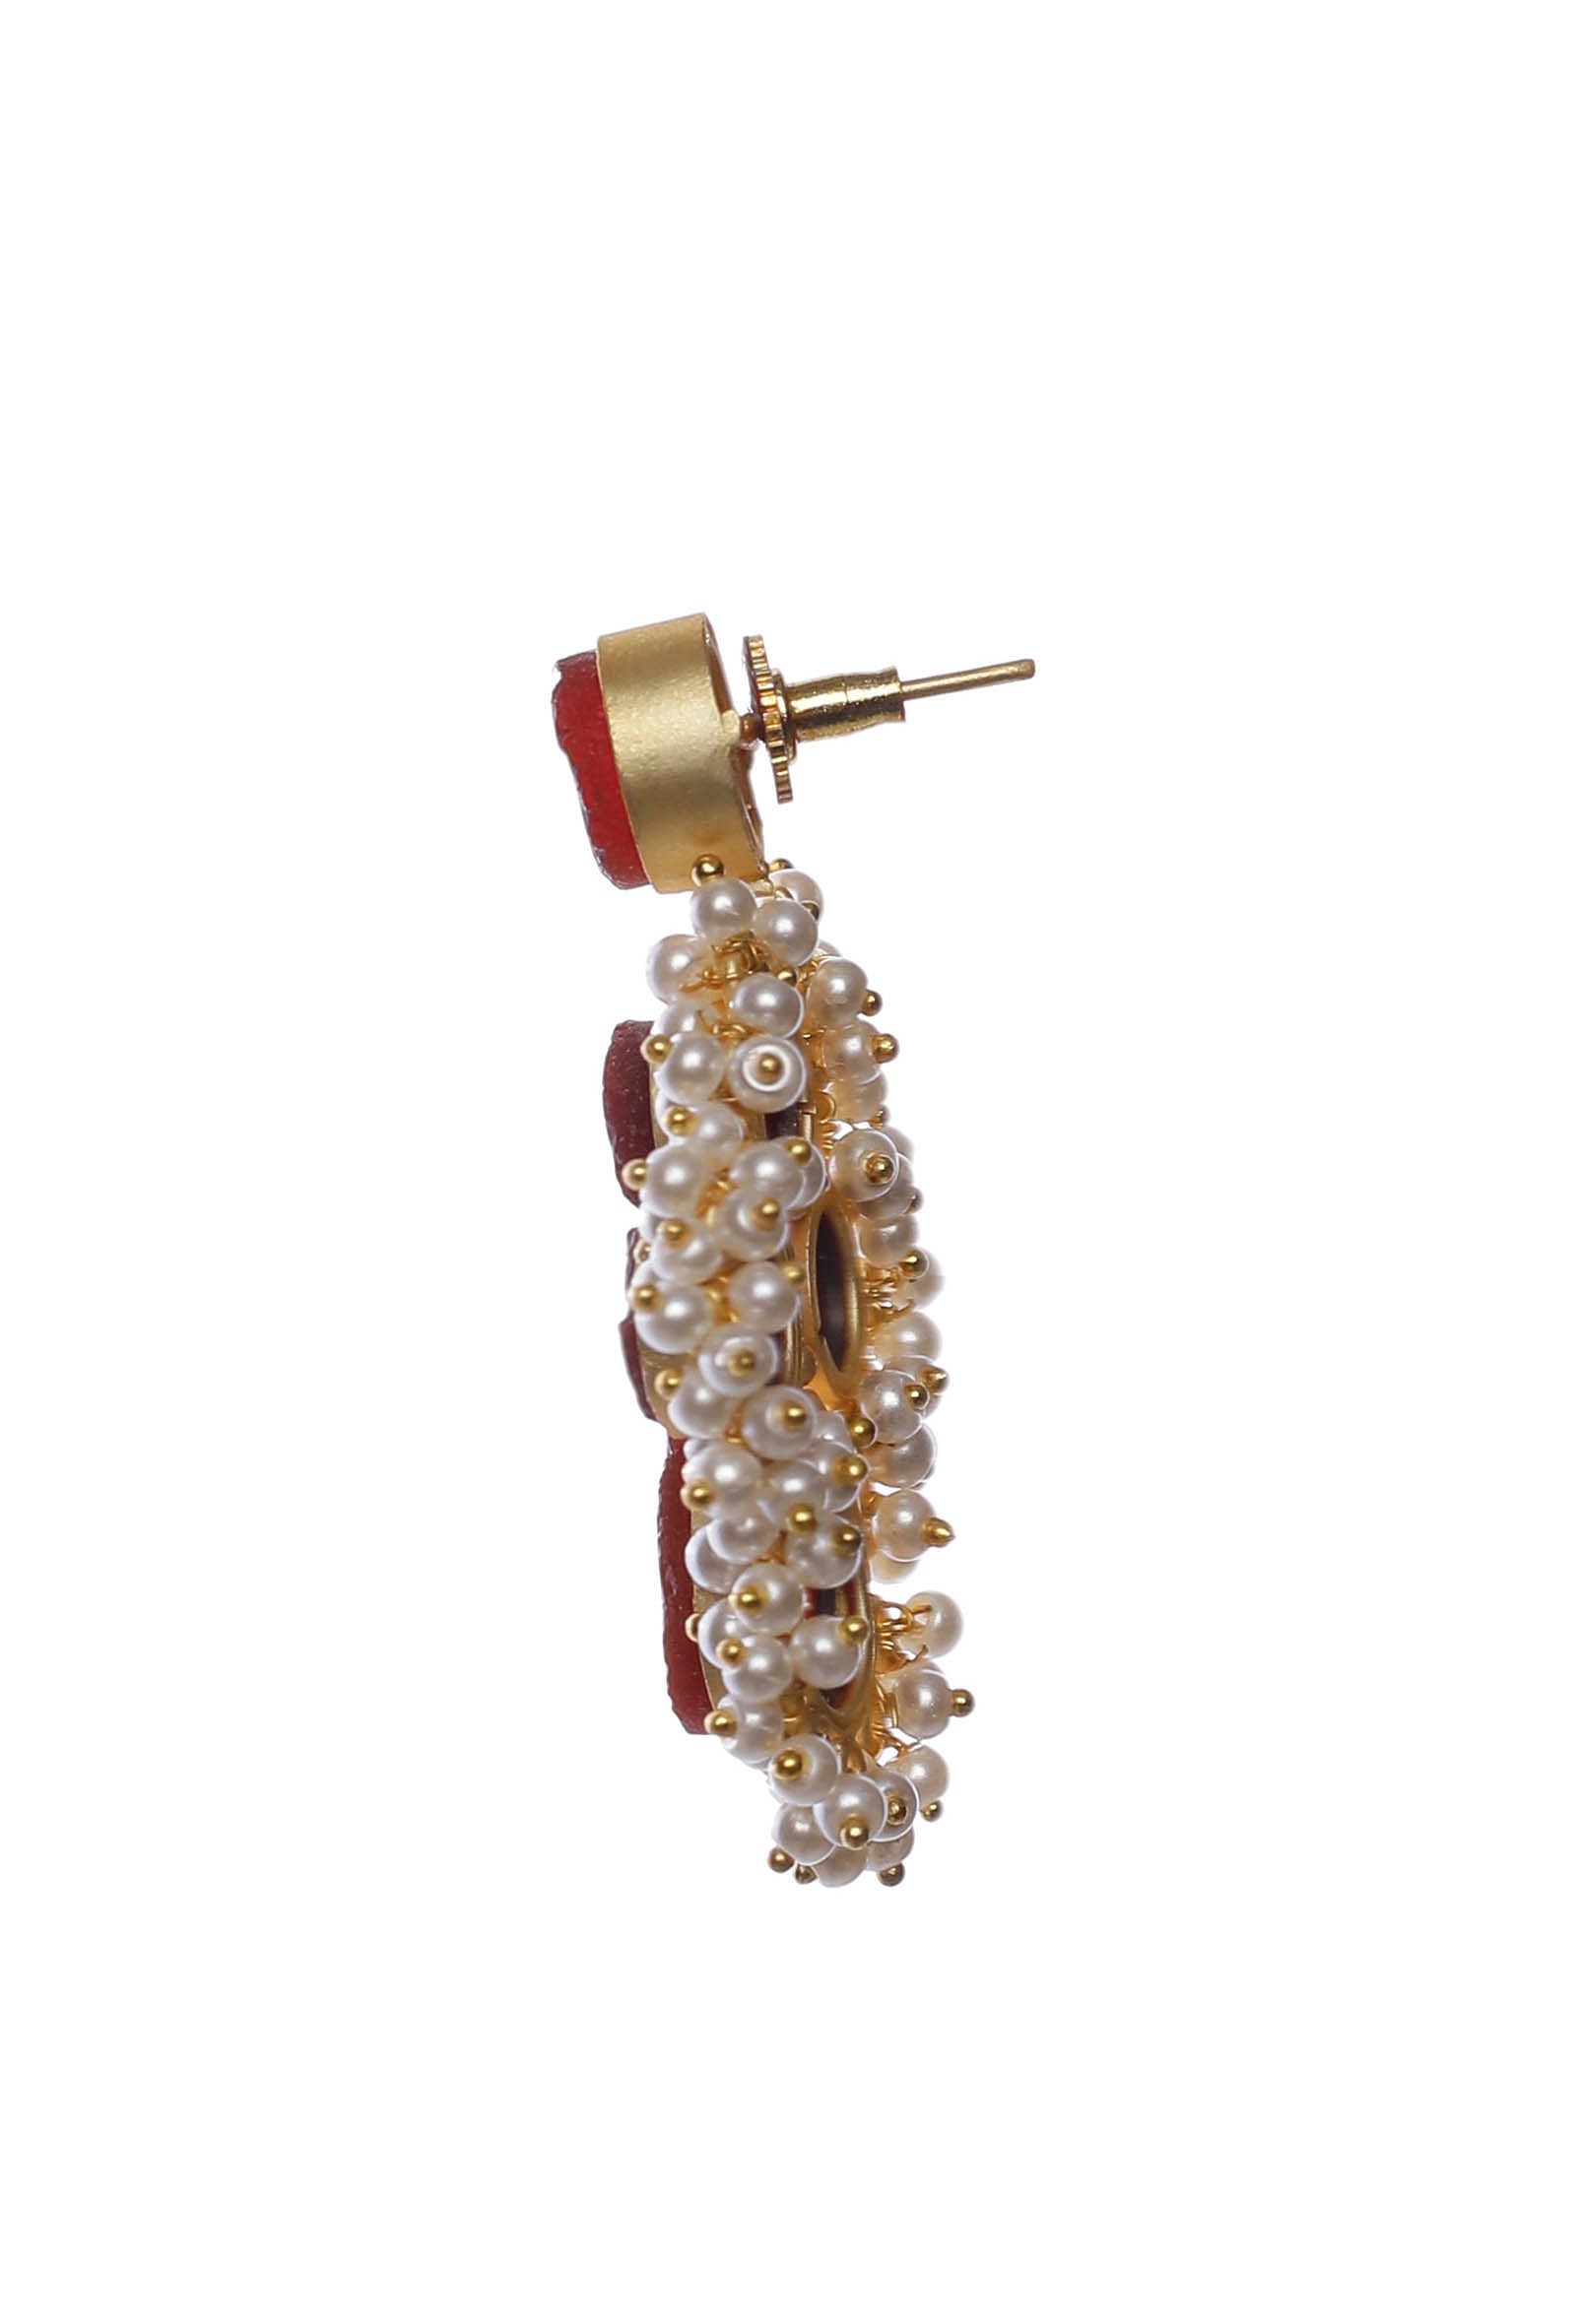 Buy Red Zircon Gold Plated Earrings Online - Unniyarcha